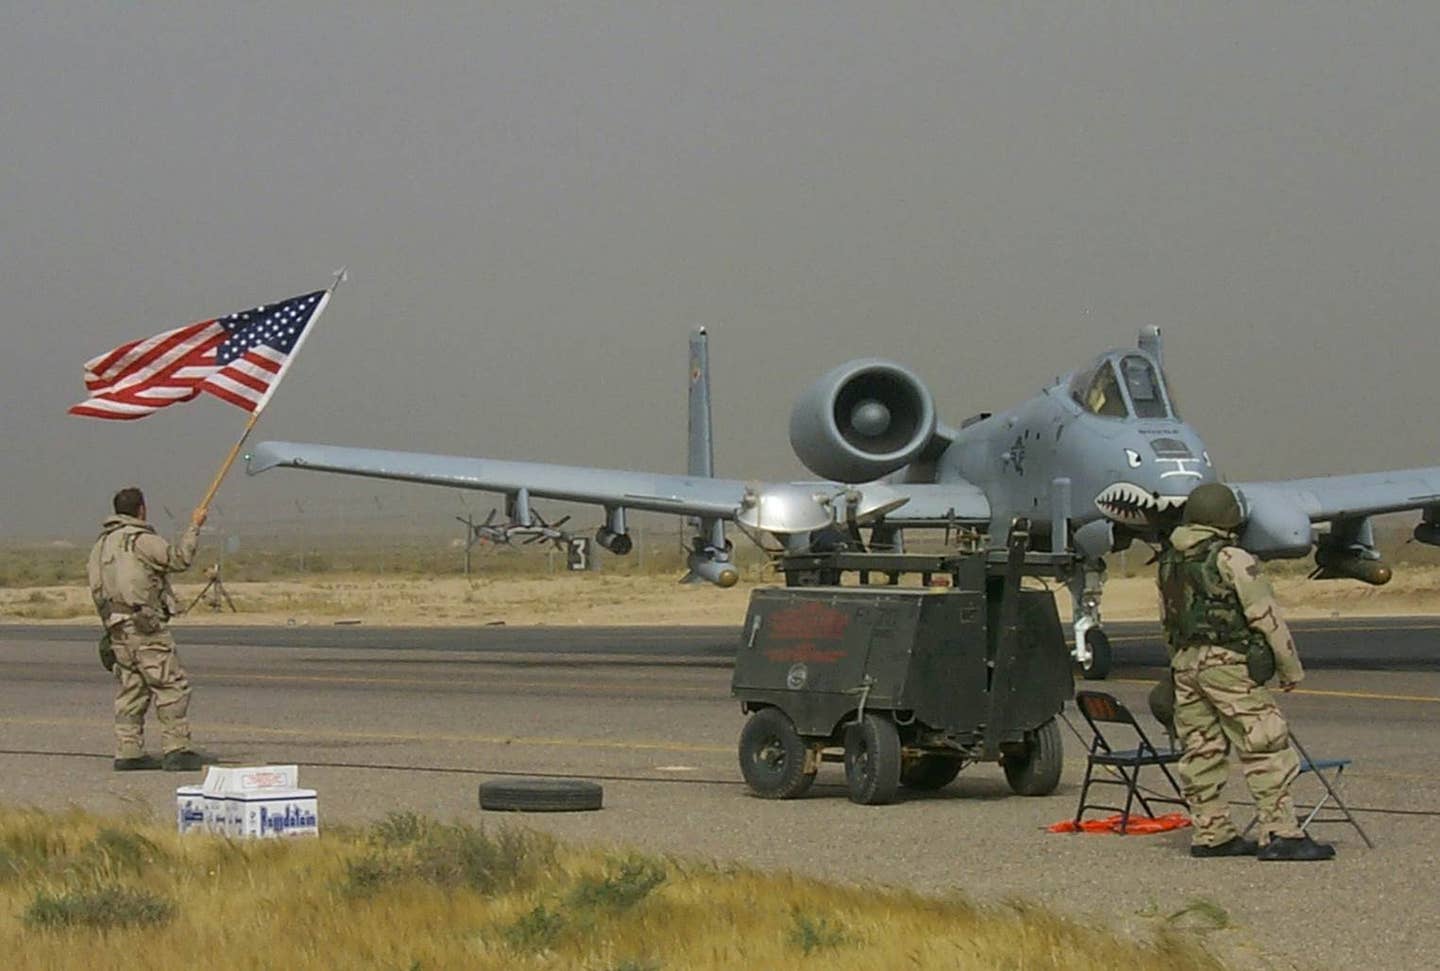 A fully armed A-10 prepares to depart its base for an Iraqi Freedom mission. <em>via Kim “KC” Campbell</em>